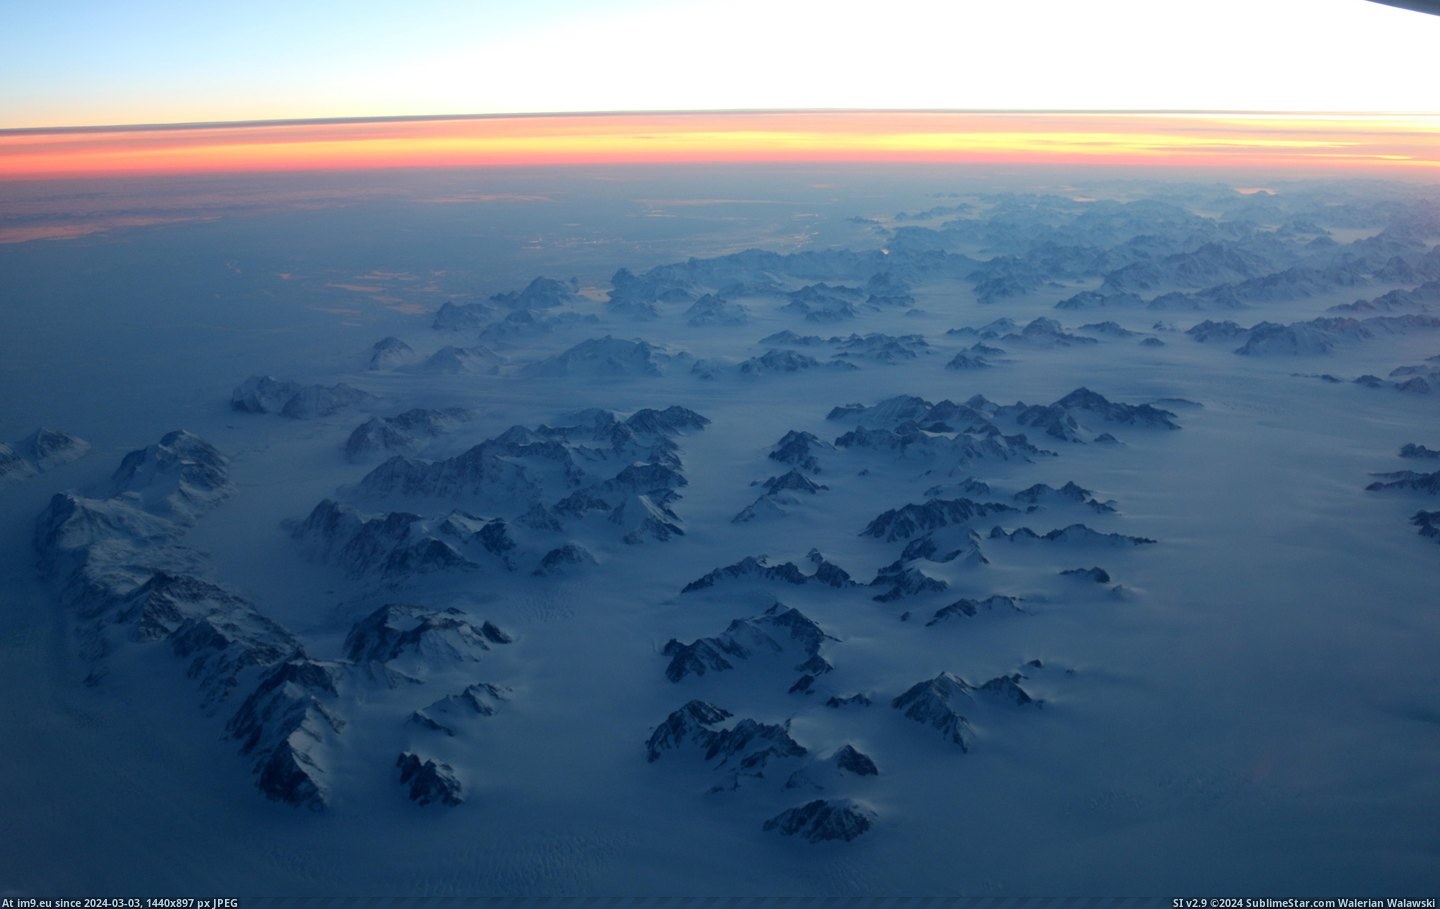 #Sunset #Canada #Ocean #Flight #Meets #Greenland #Iceland #Lucky #Frozen [Earthporn] Where Greenland meets the frozen ocean at sunset. Lucky view on a flight between Iceland and Canada  [5472x3419] Pic. (Изображение из альбом My r/EARTHPORN favs))